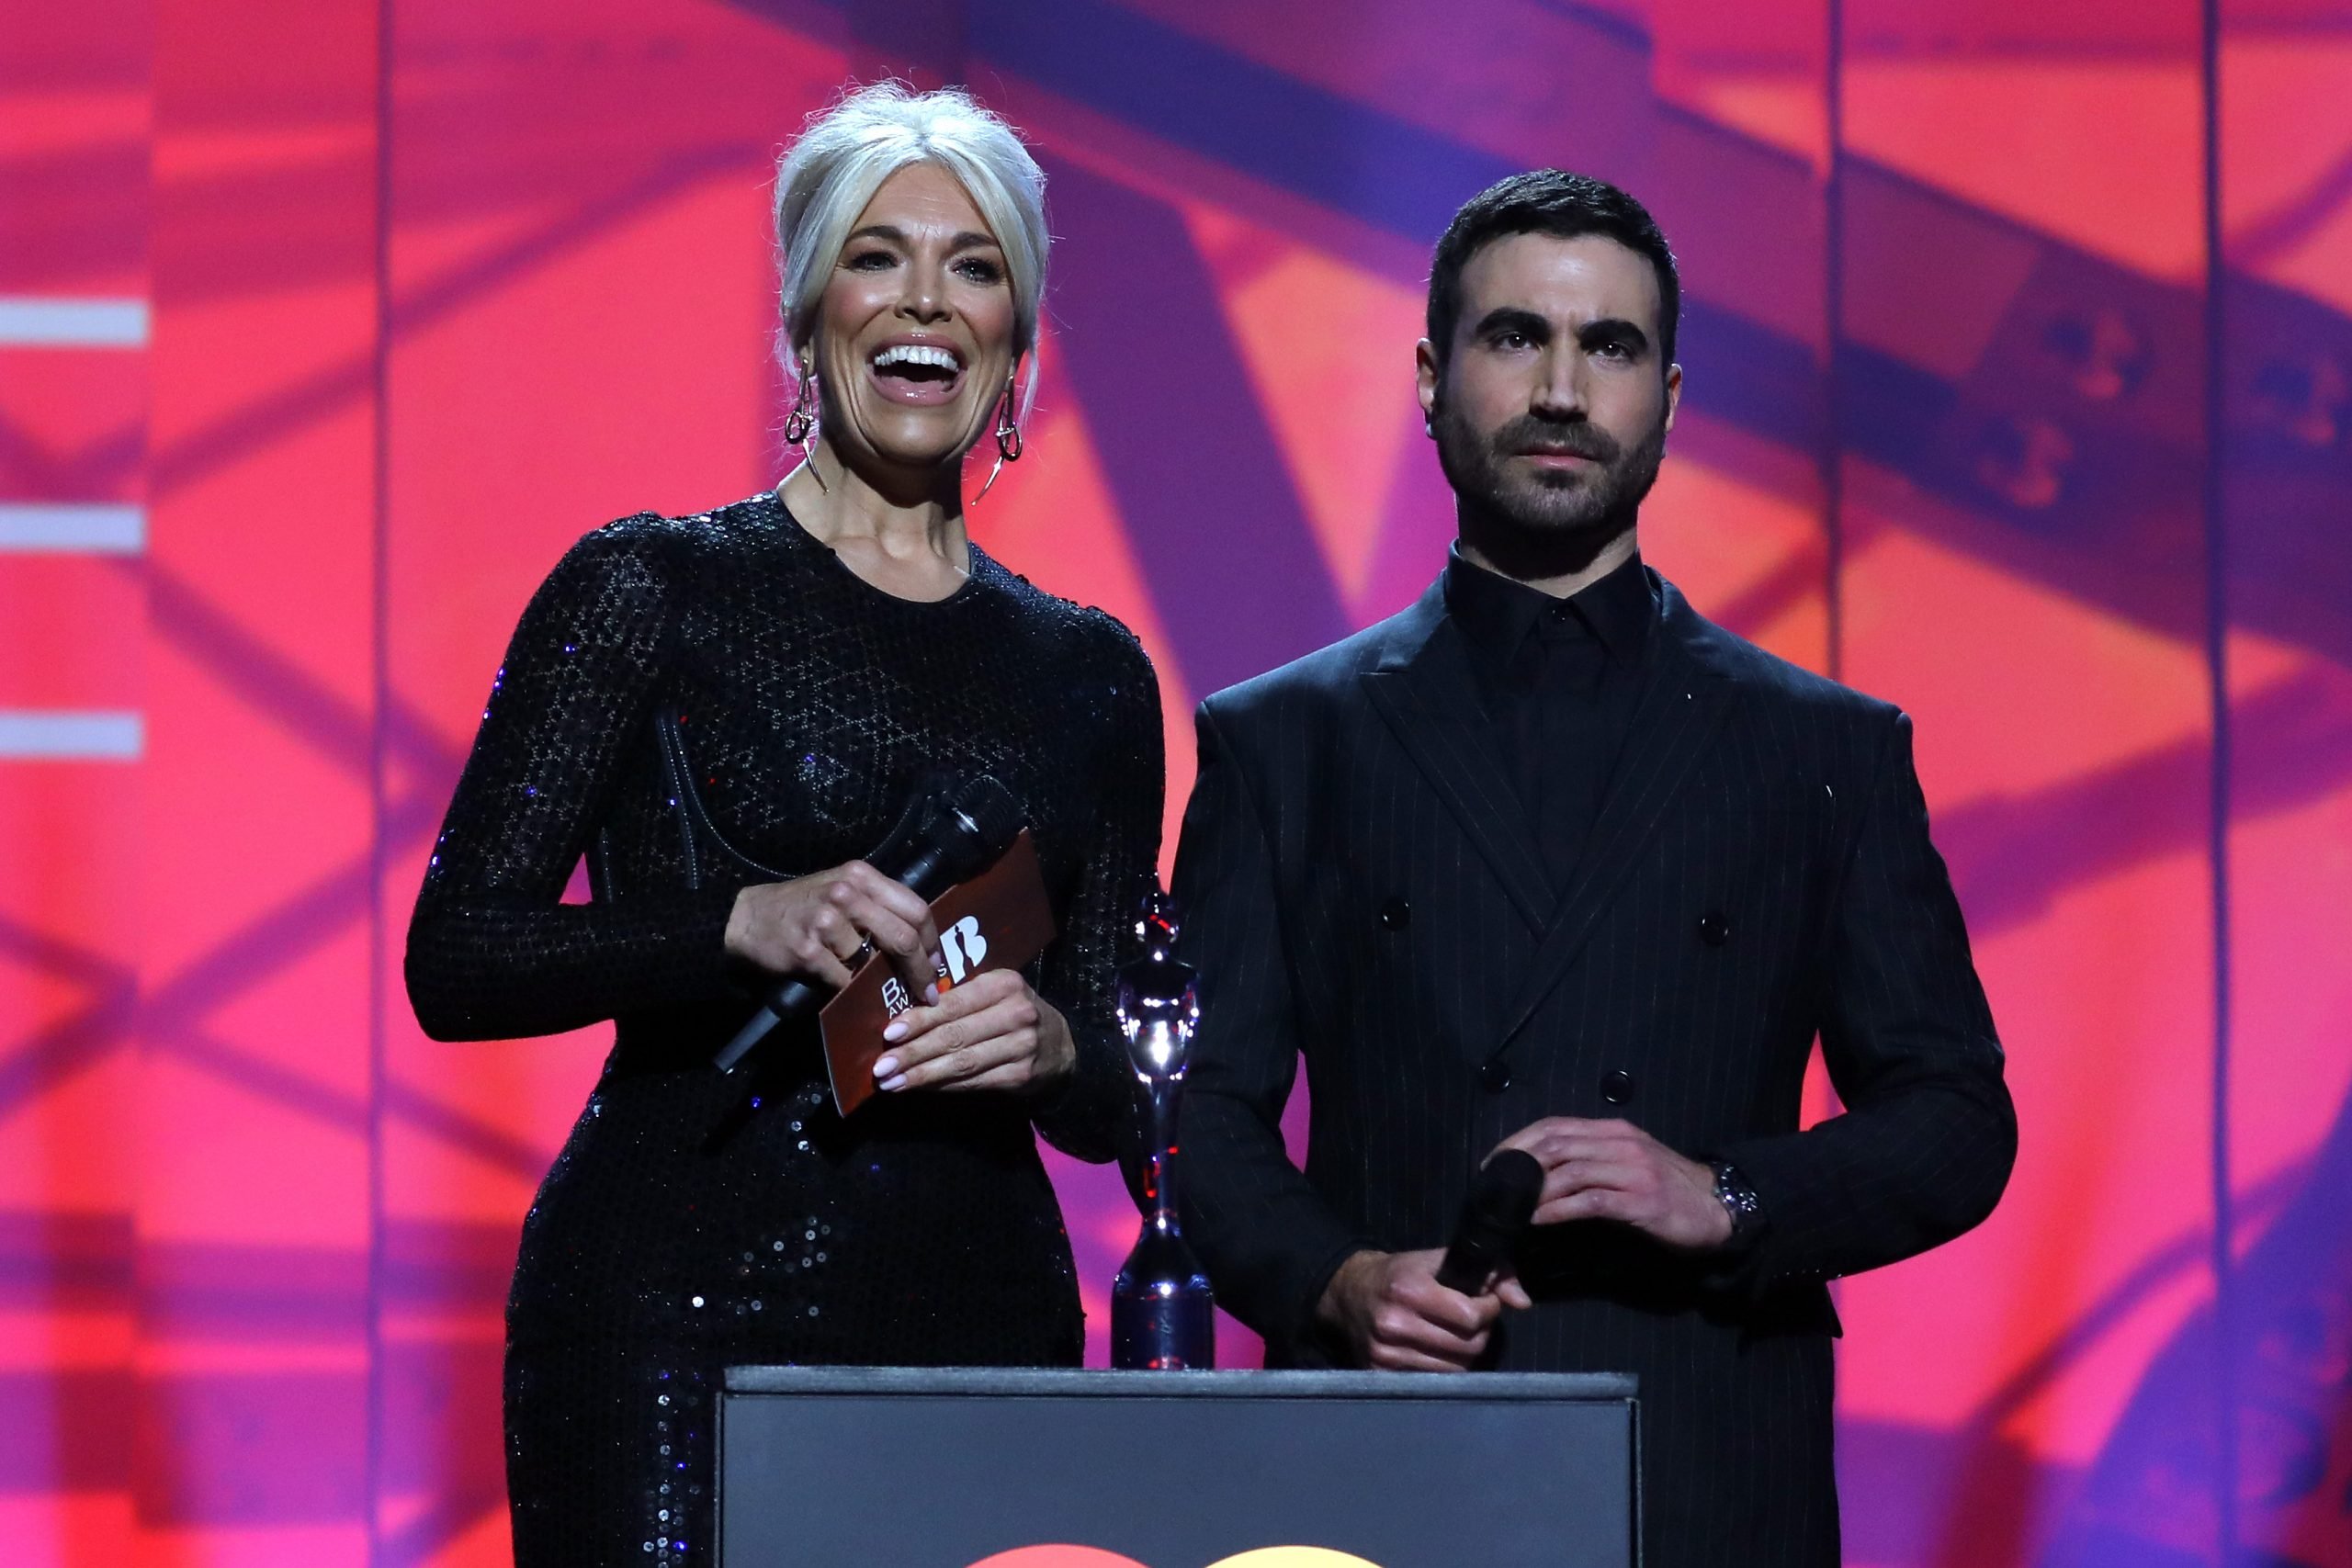 Ted Lasso actors Hannah Waddingham and Brett Goldstein present the award for Song of the Year at the 2022 BRIT awards